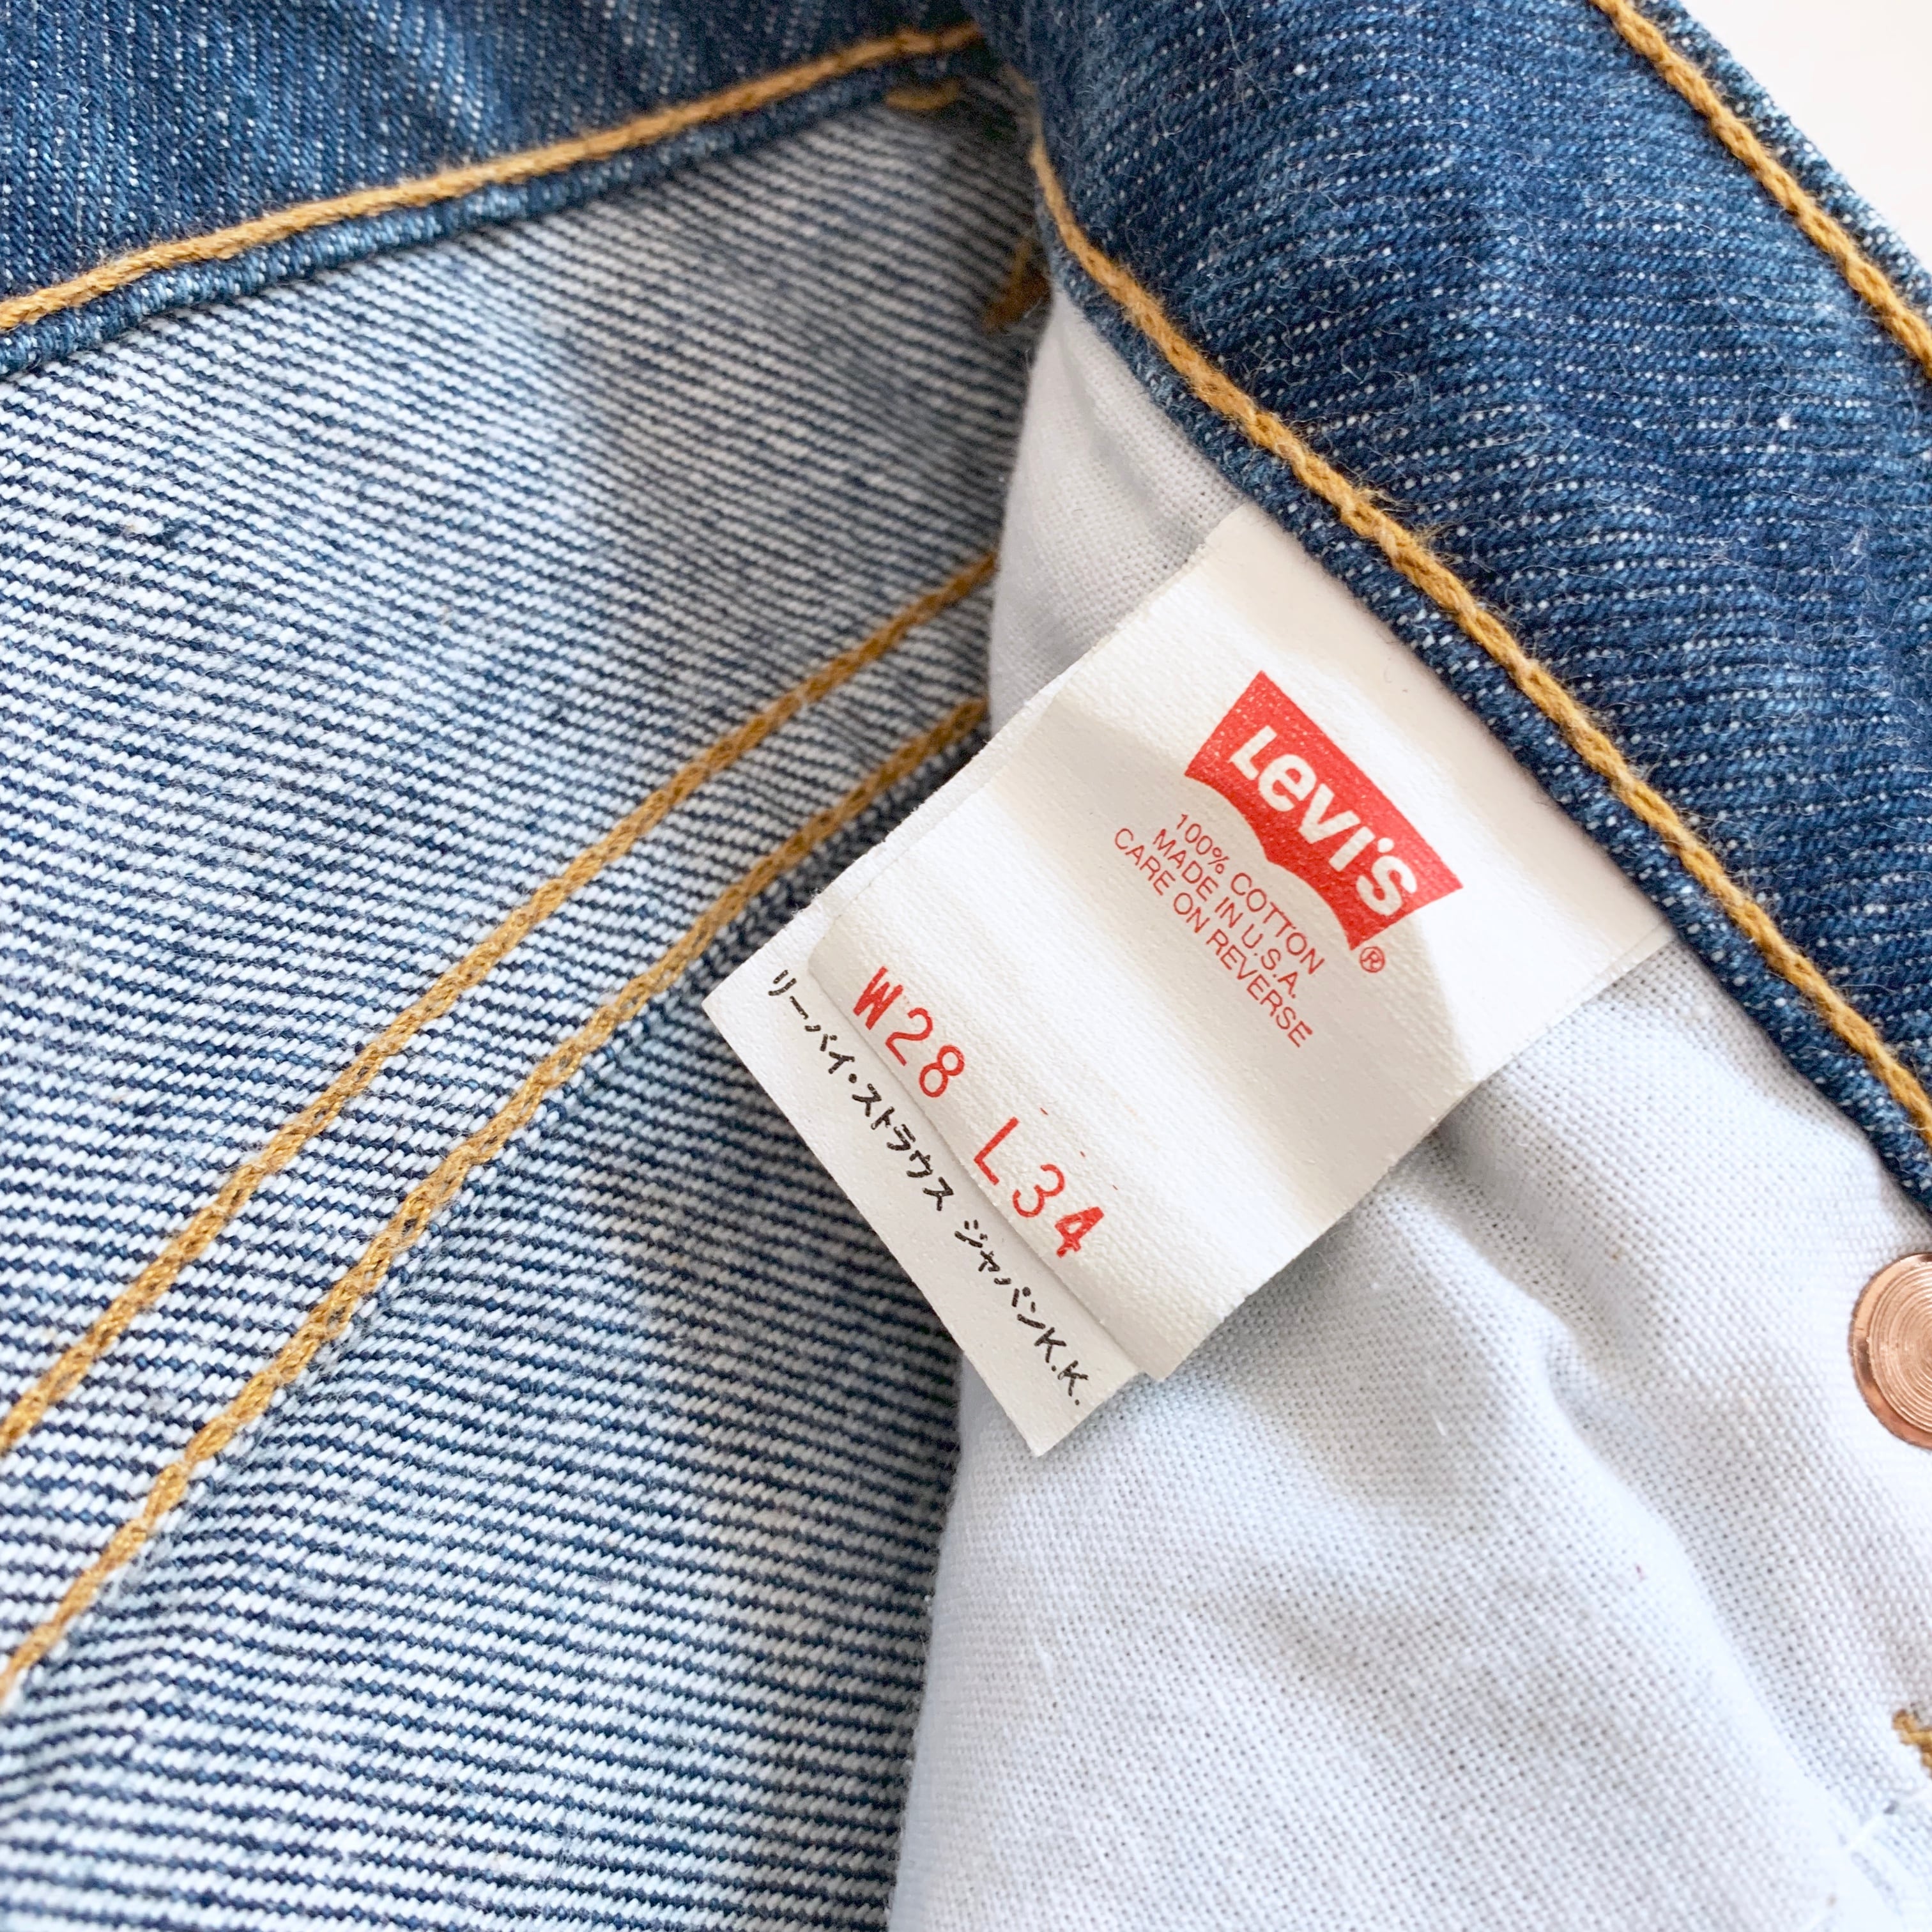 Levi's   510   MADE IN USA